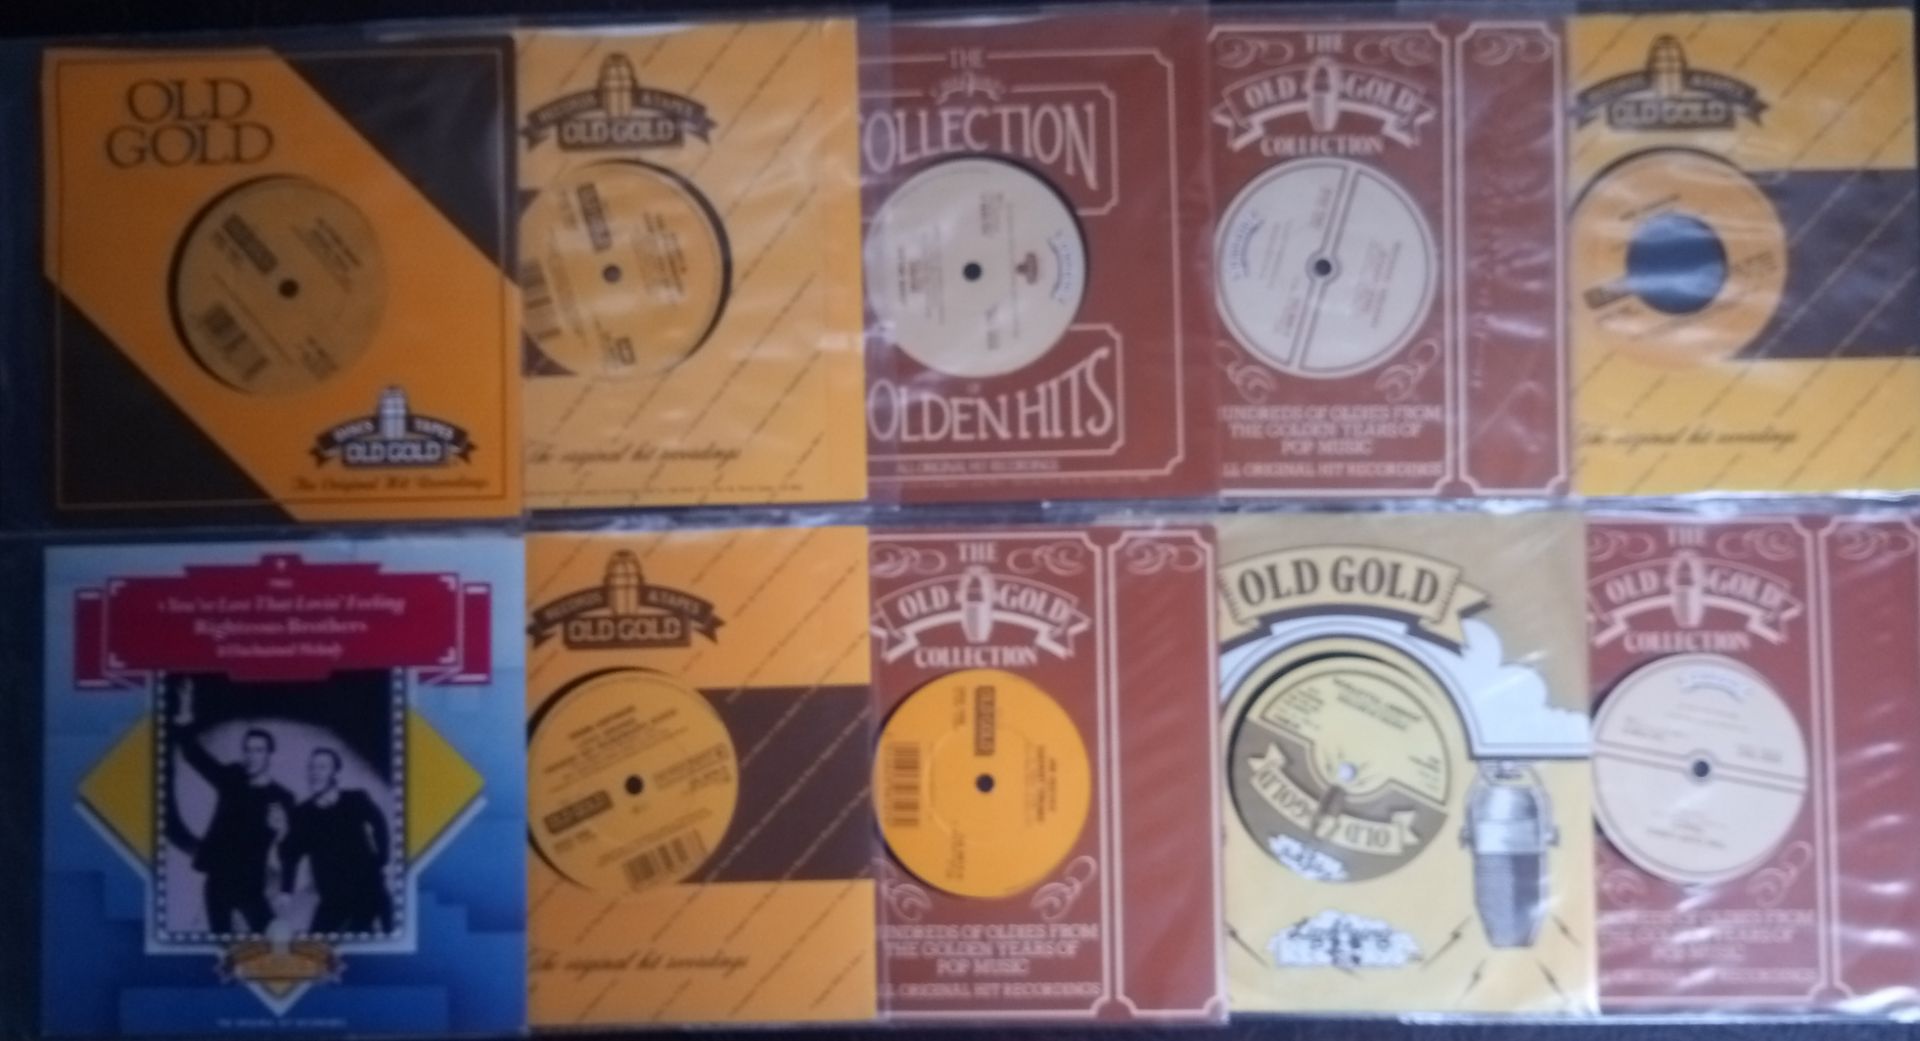 A collection of 19 x old gold 7" vinyl records. - Image 2 of 2